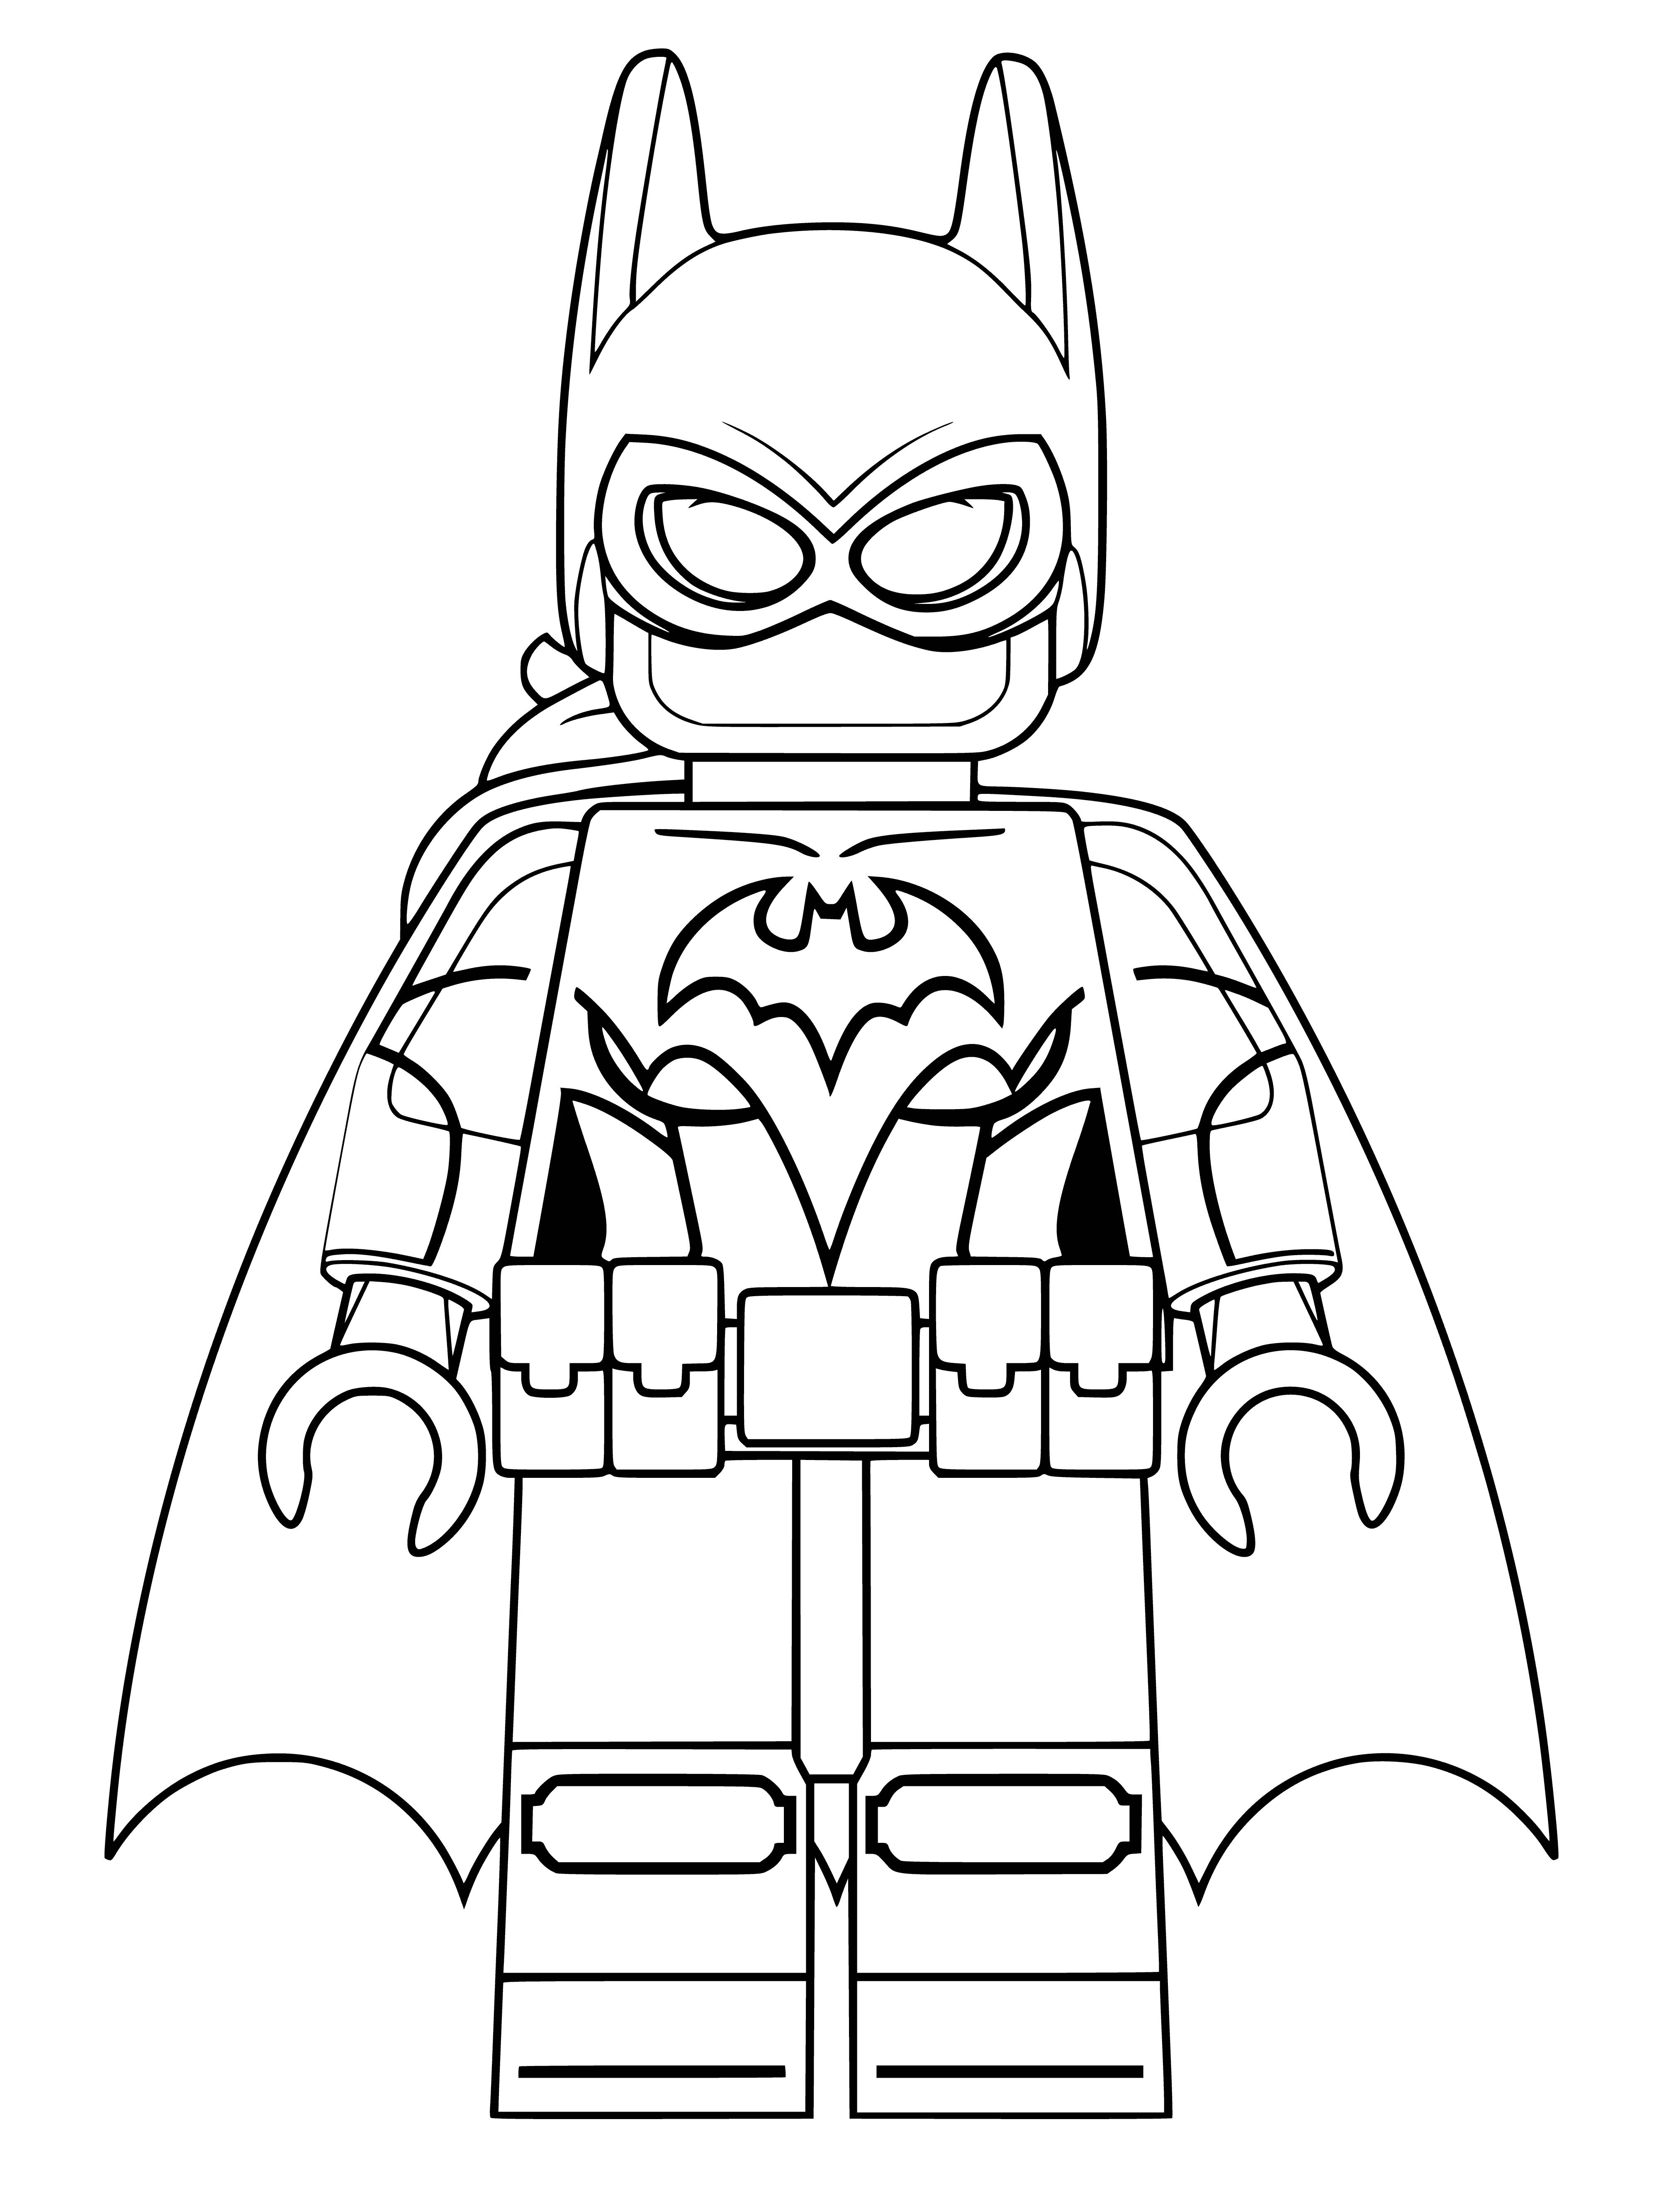 Butterl coloring page